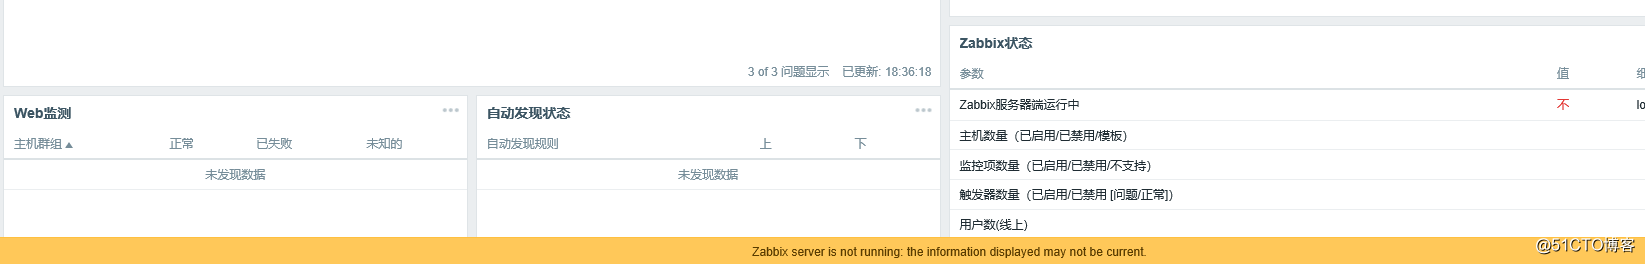 zabbix information displayed may not be current